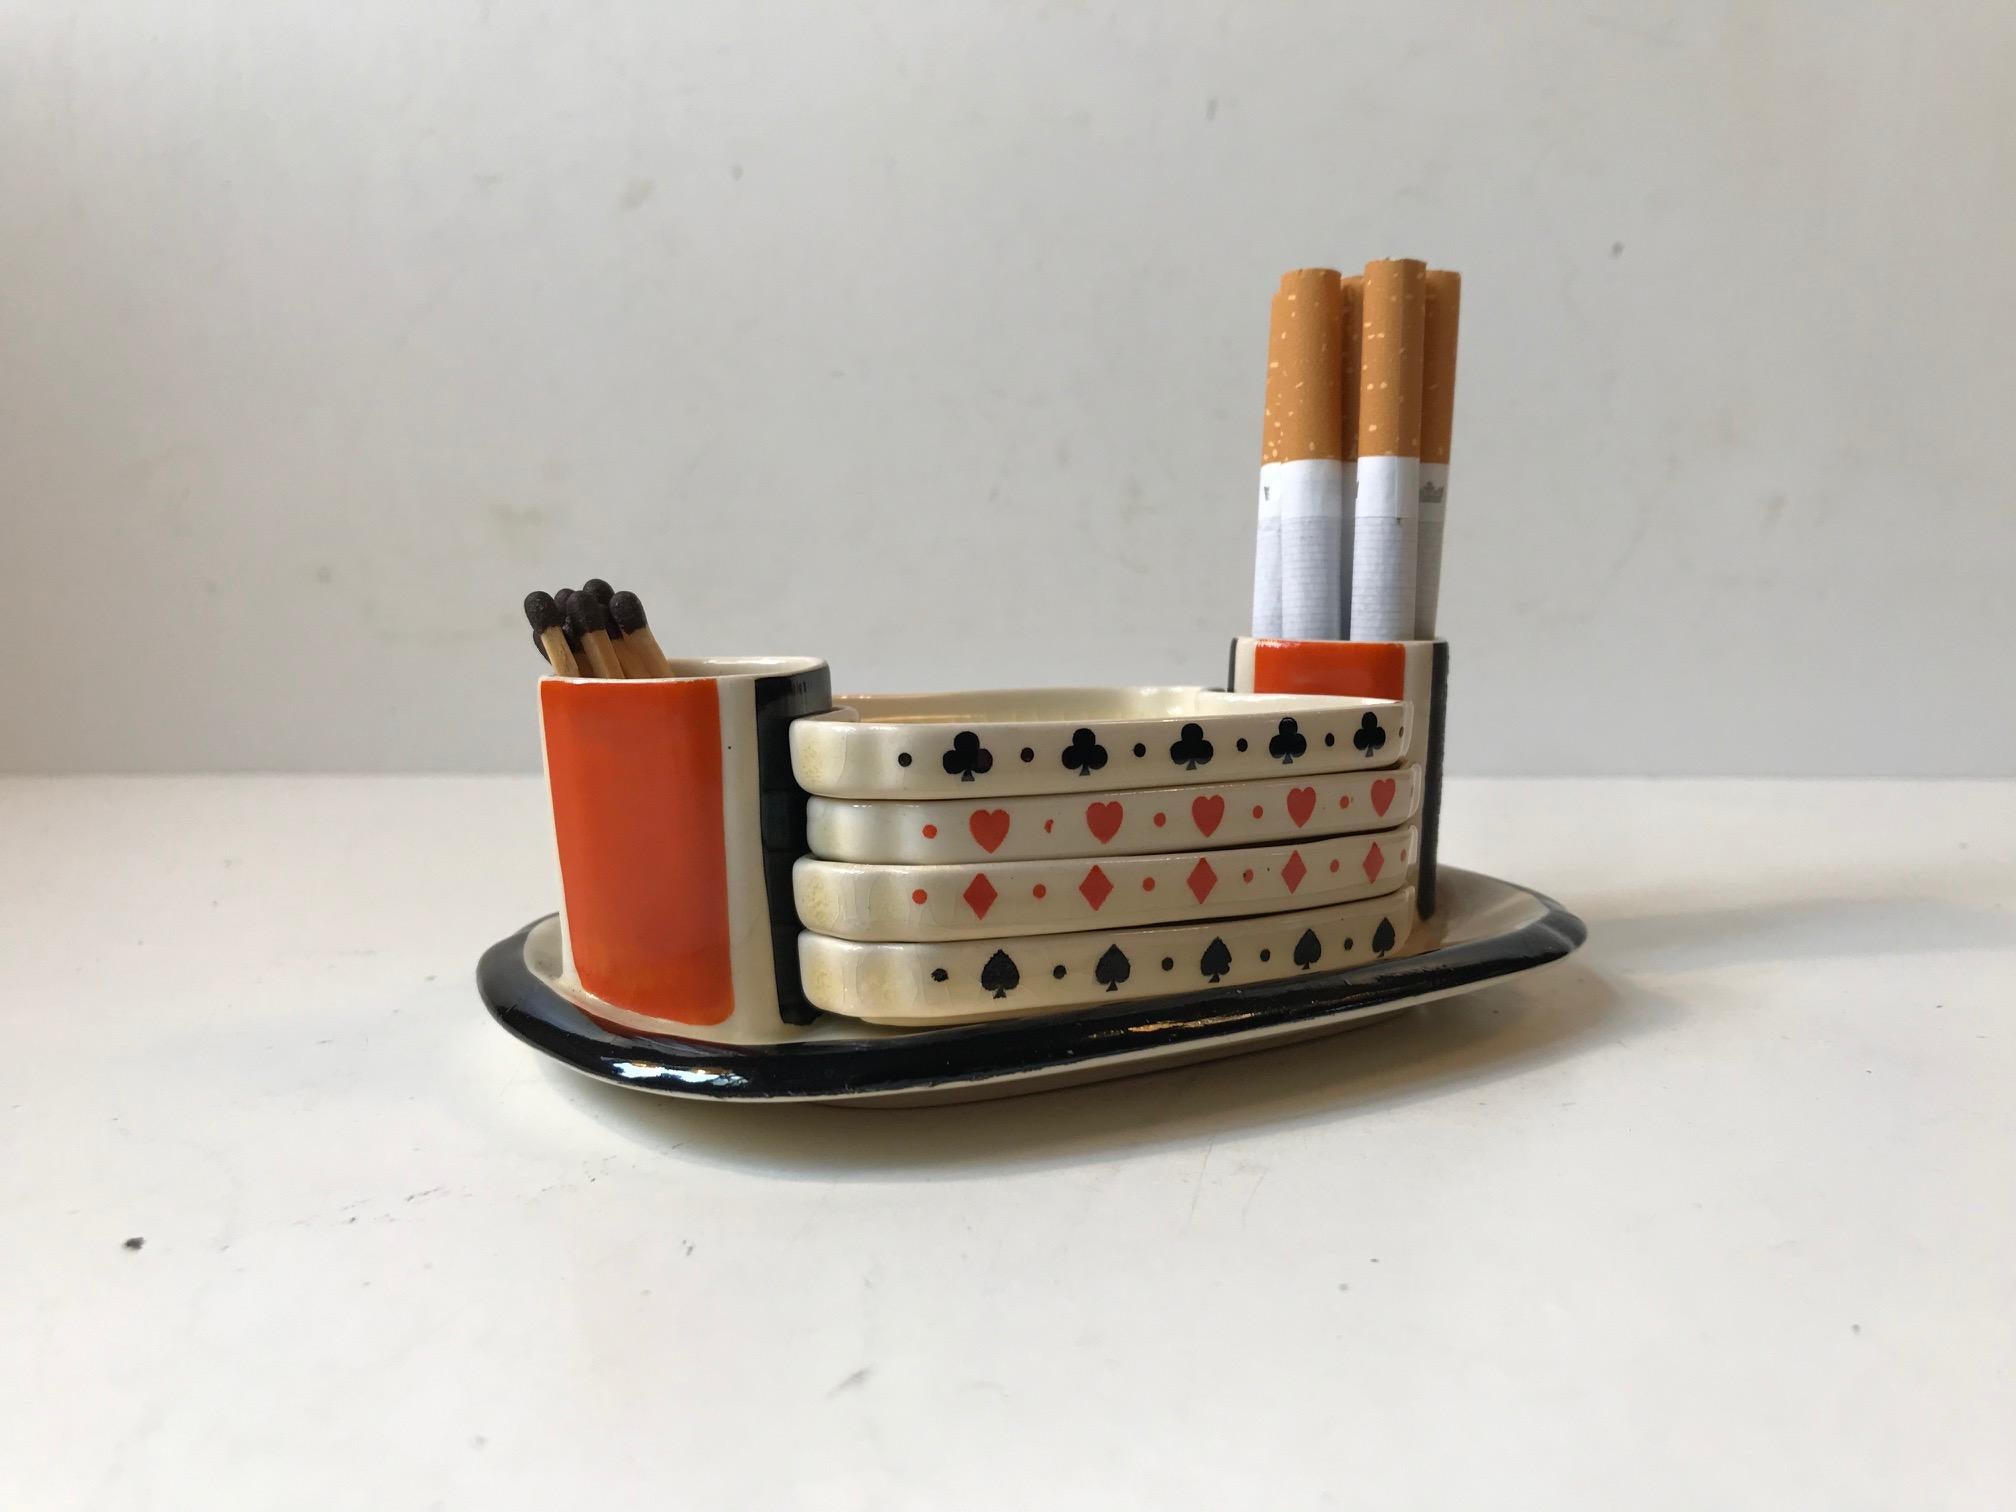 Unusual yet practical novelty item from Royal Doulton, England circa 1930. A set of 4 ashtrays, each with a card suit on it: diamonds, club, spades and hearts - which all fit neatly onto a china holder. On each side of the holder are red and black